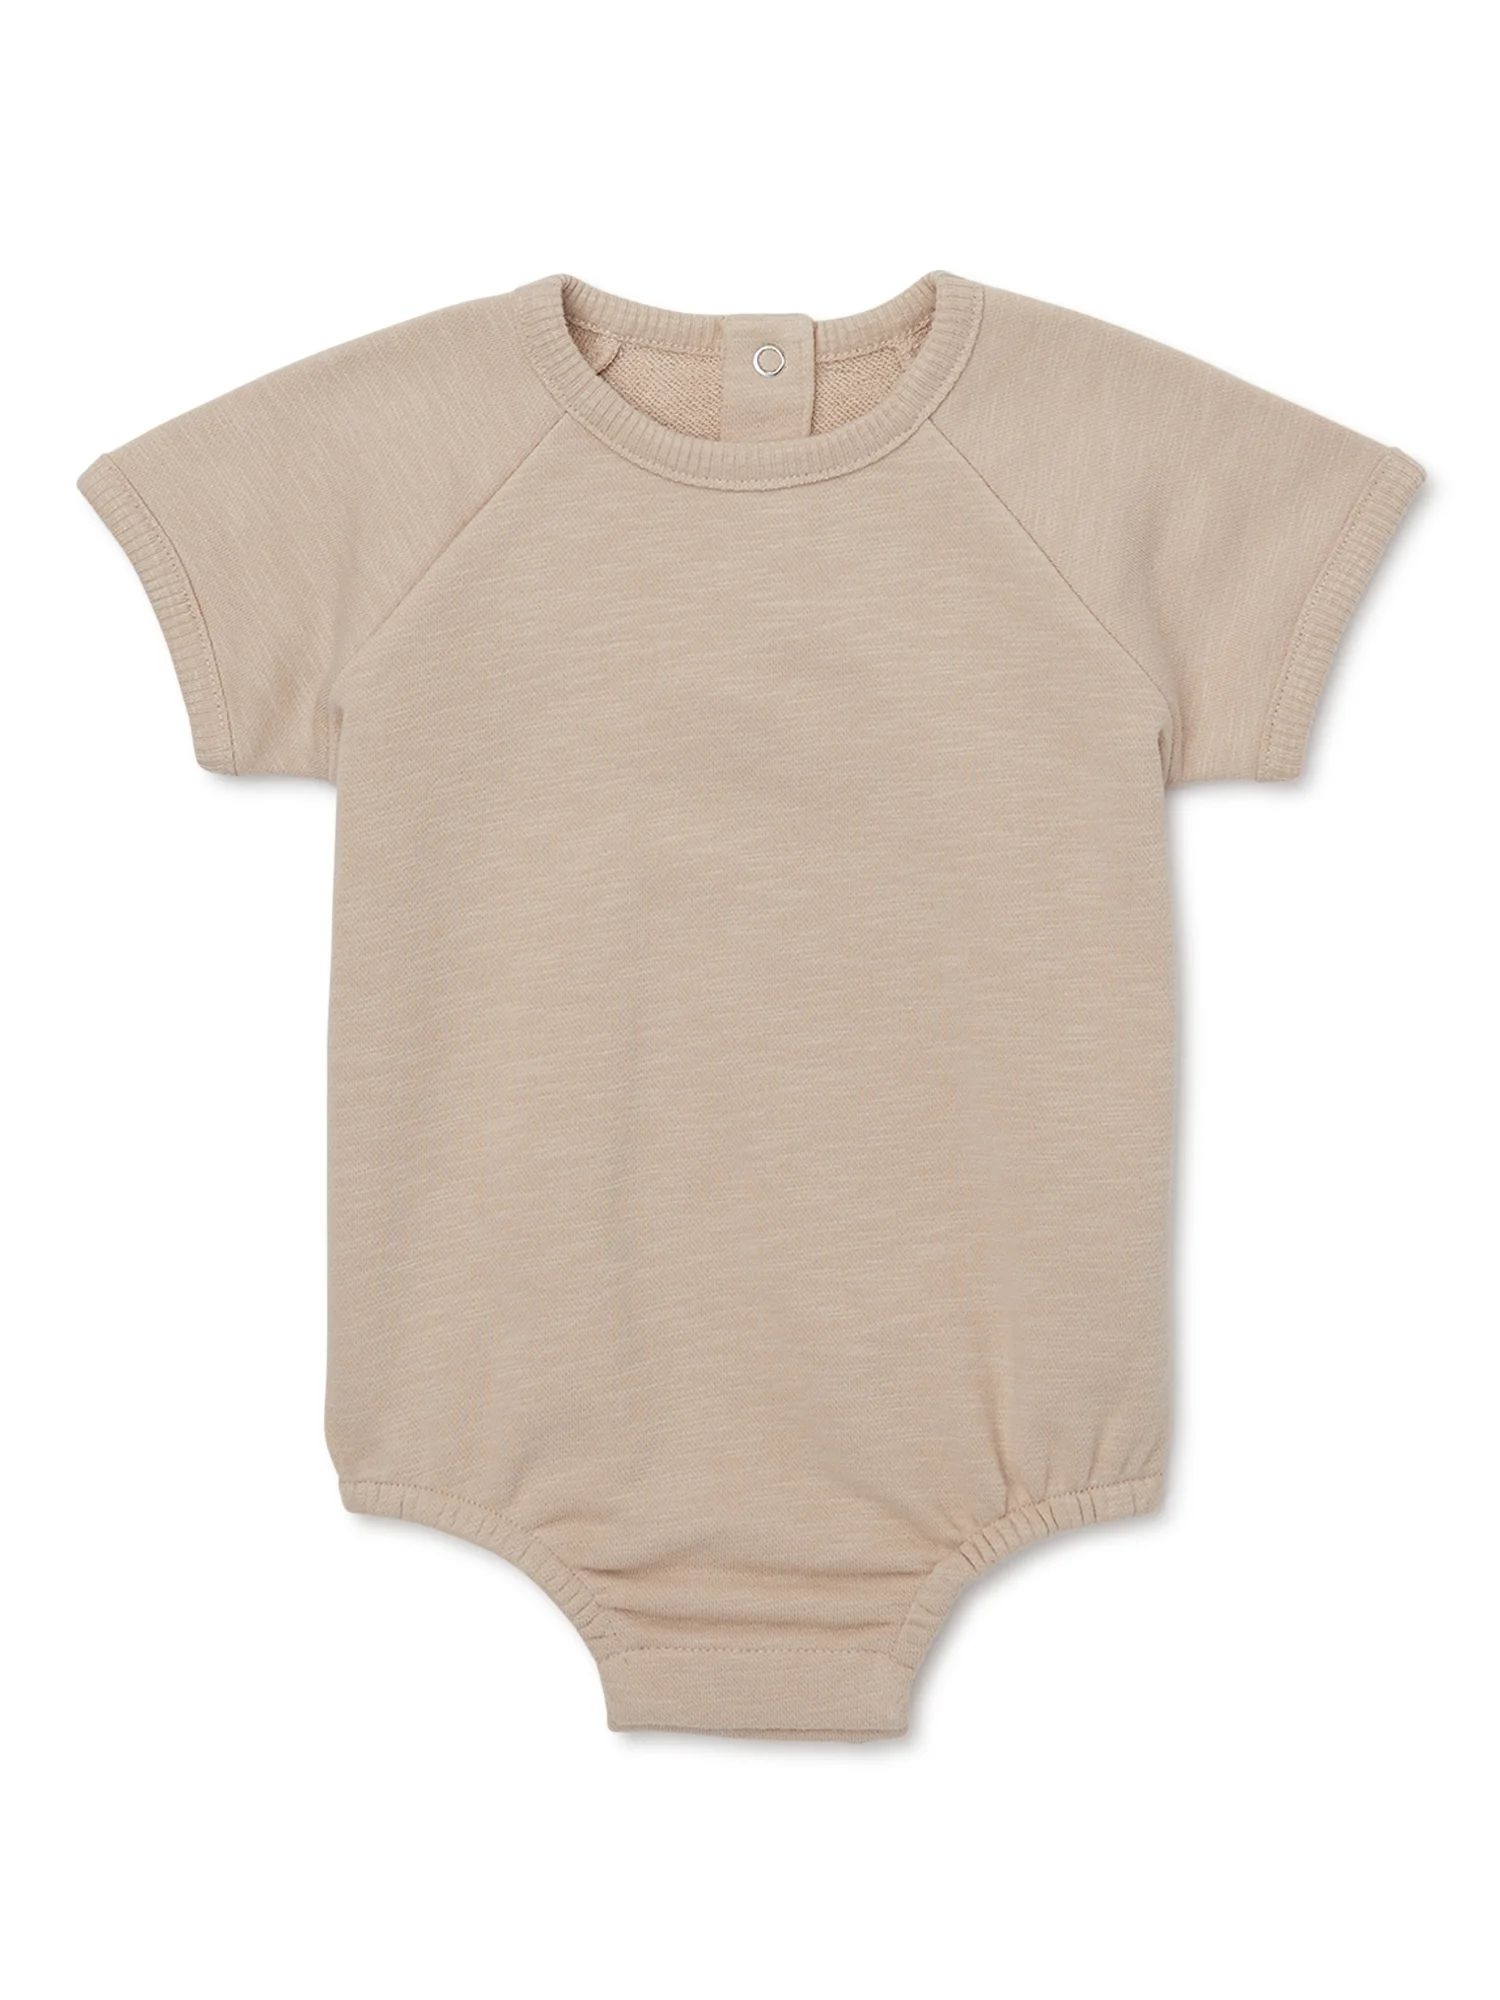 easy-peasy Baby Short Sleeve French Terry Solid Bodysuit, Sizes 0-24 Months | Walmart (US)